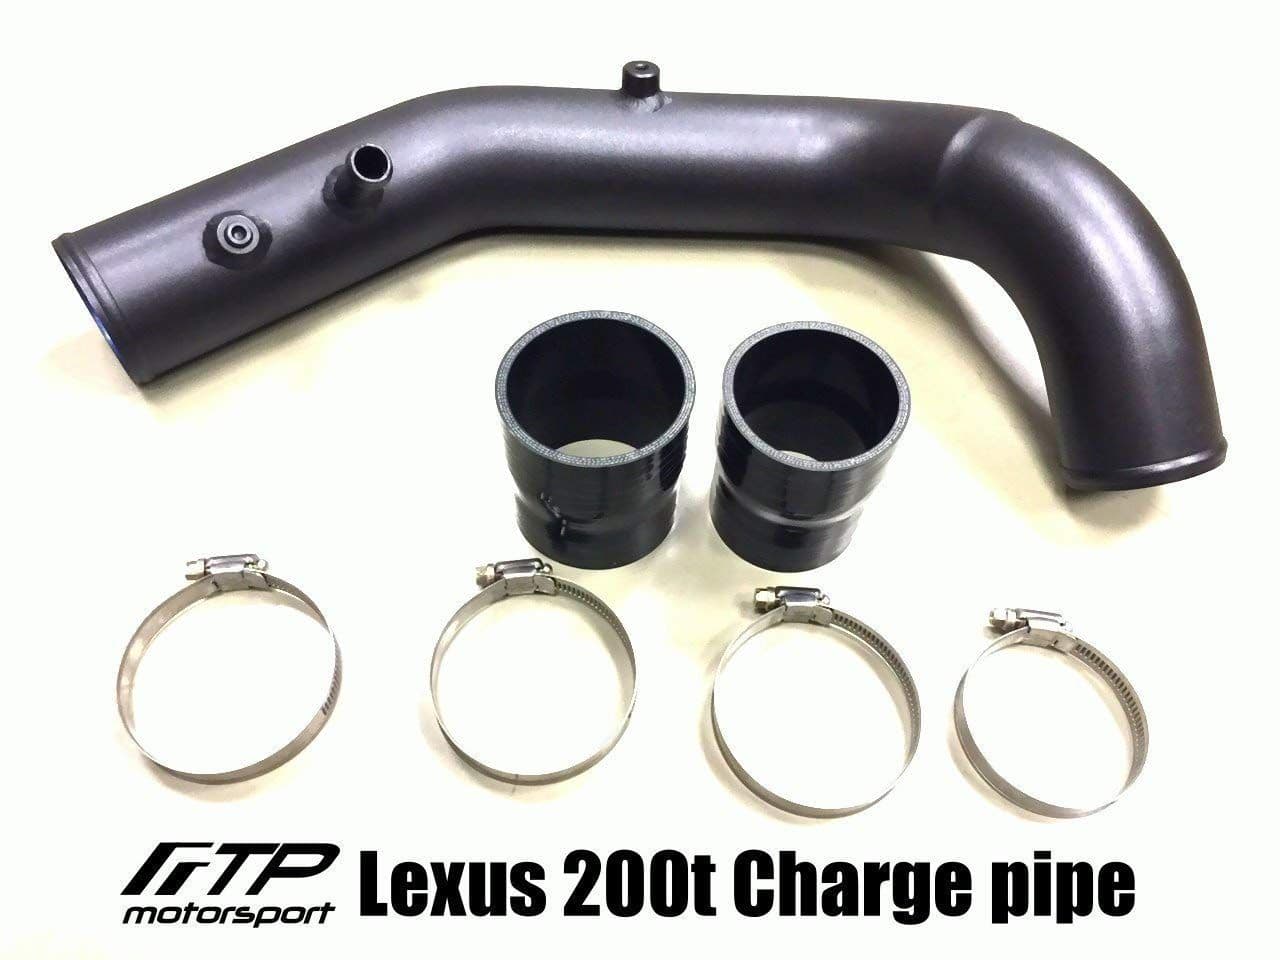 Engine - Power Adders - Lexus 200t TTI Hybrid Turbo and Turbo Kit parts for 8AR-FTS - New - 2014 to 2019 Lexus IS200t - 2015 to 2019 Lexus GS200t - 2015 to 2019 Lexus RC200t - 2014 to 2019 Lexus NX200t - 2017 to 2019 Lexus IS300 - 2017 to 2019 Lexus GS300 - 2017 to 2019 Lexus RC300 - 2017 to 2019 Lexus NX200t - Dubai, United Arab Emirates